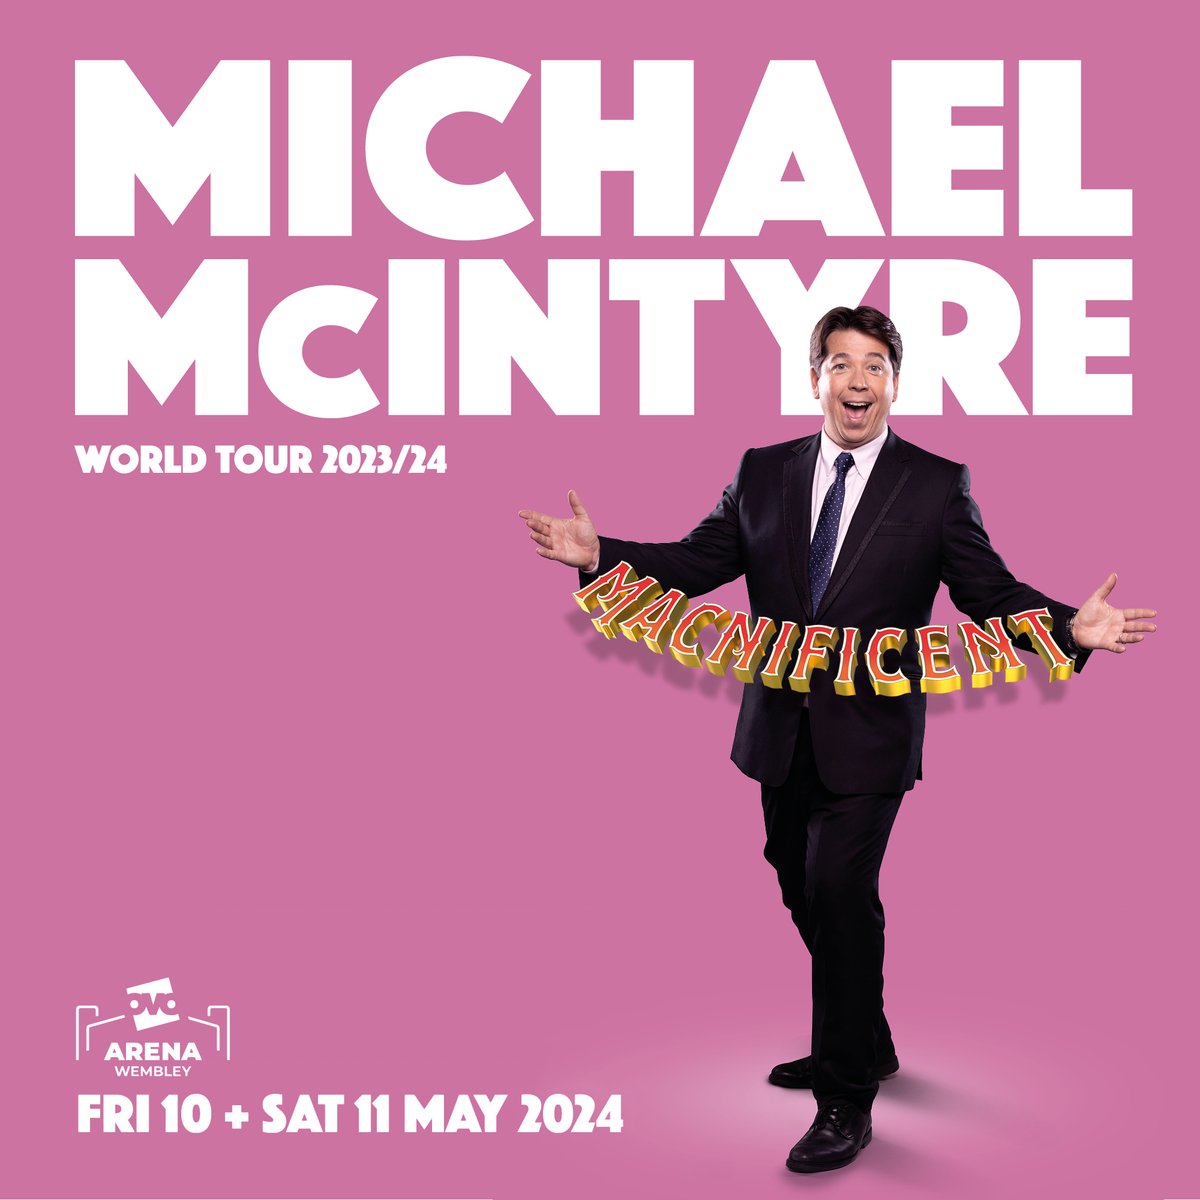 😂 Extra tickets have been released as #MichaelMcIntyre @McInTweet brings #MACNIFICENT to @OVOArena Wembley.

🎟️ Grab yours here ⬇️
bit.ly/OVOMCLMCTYR